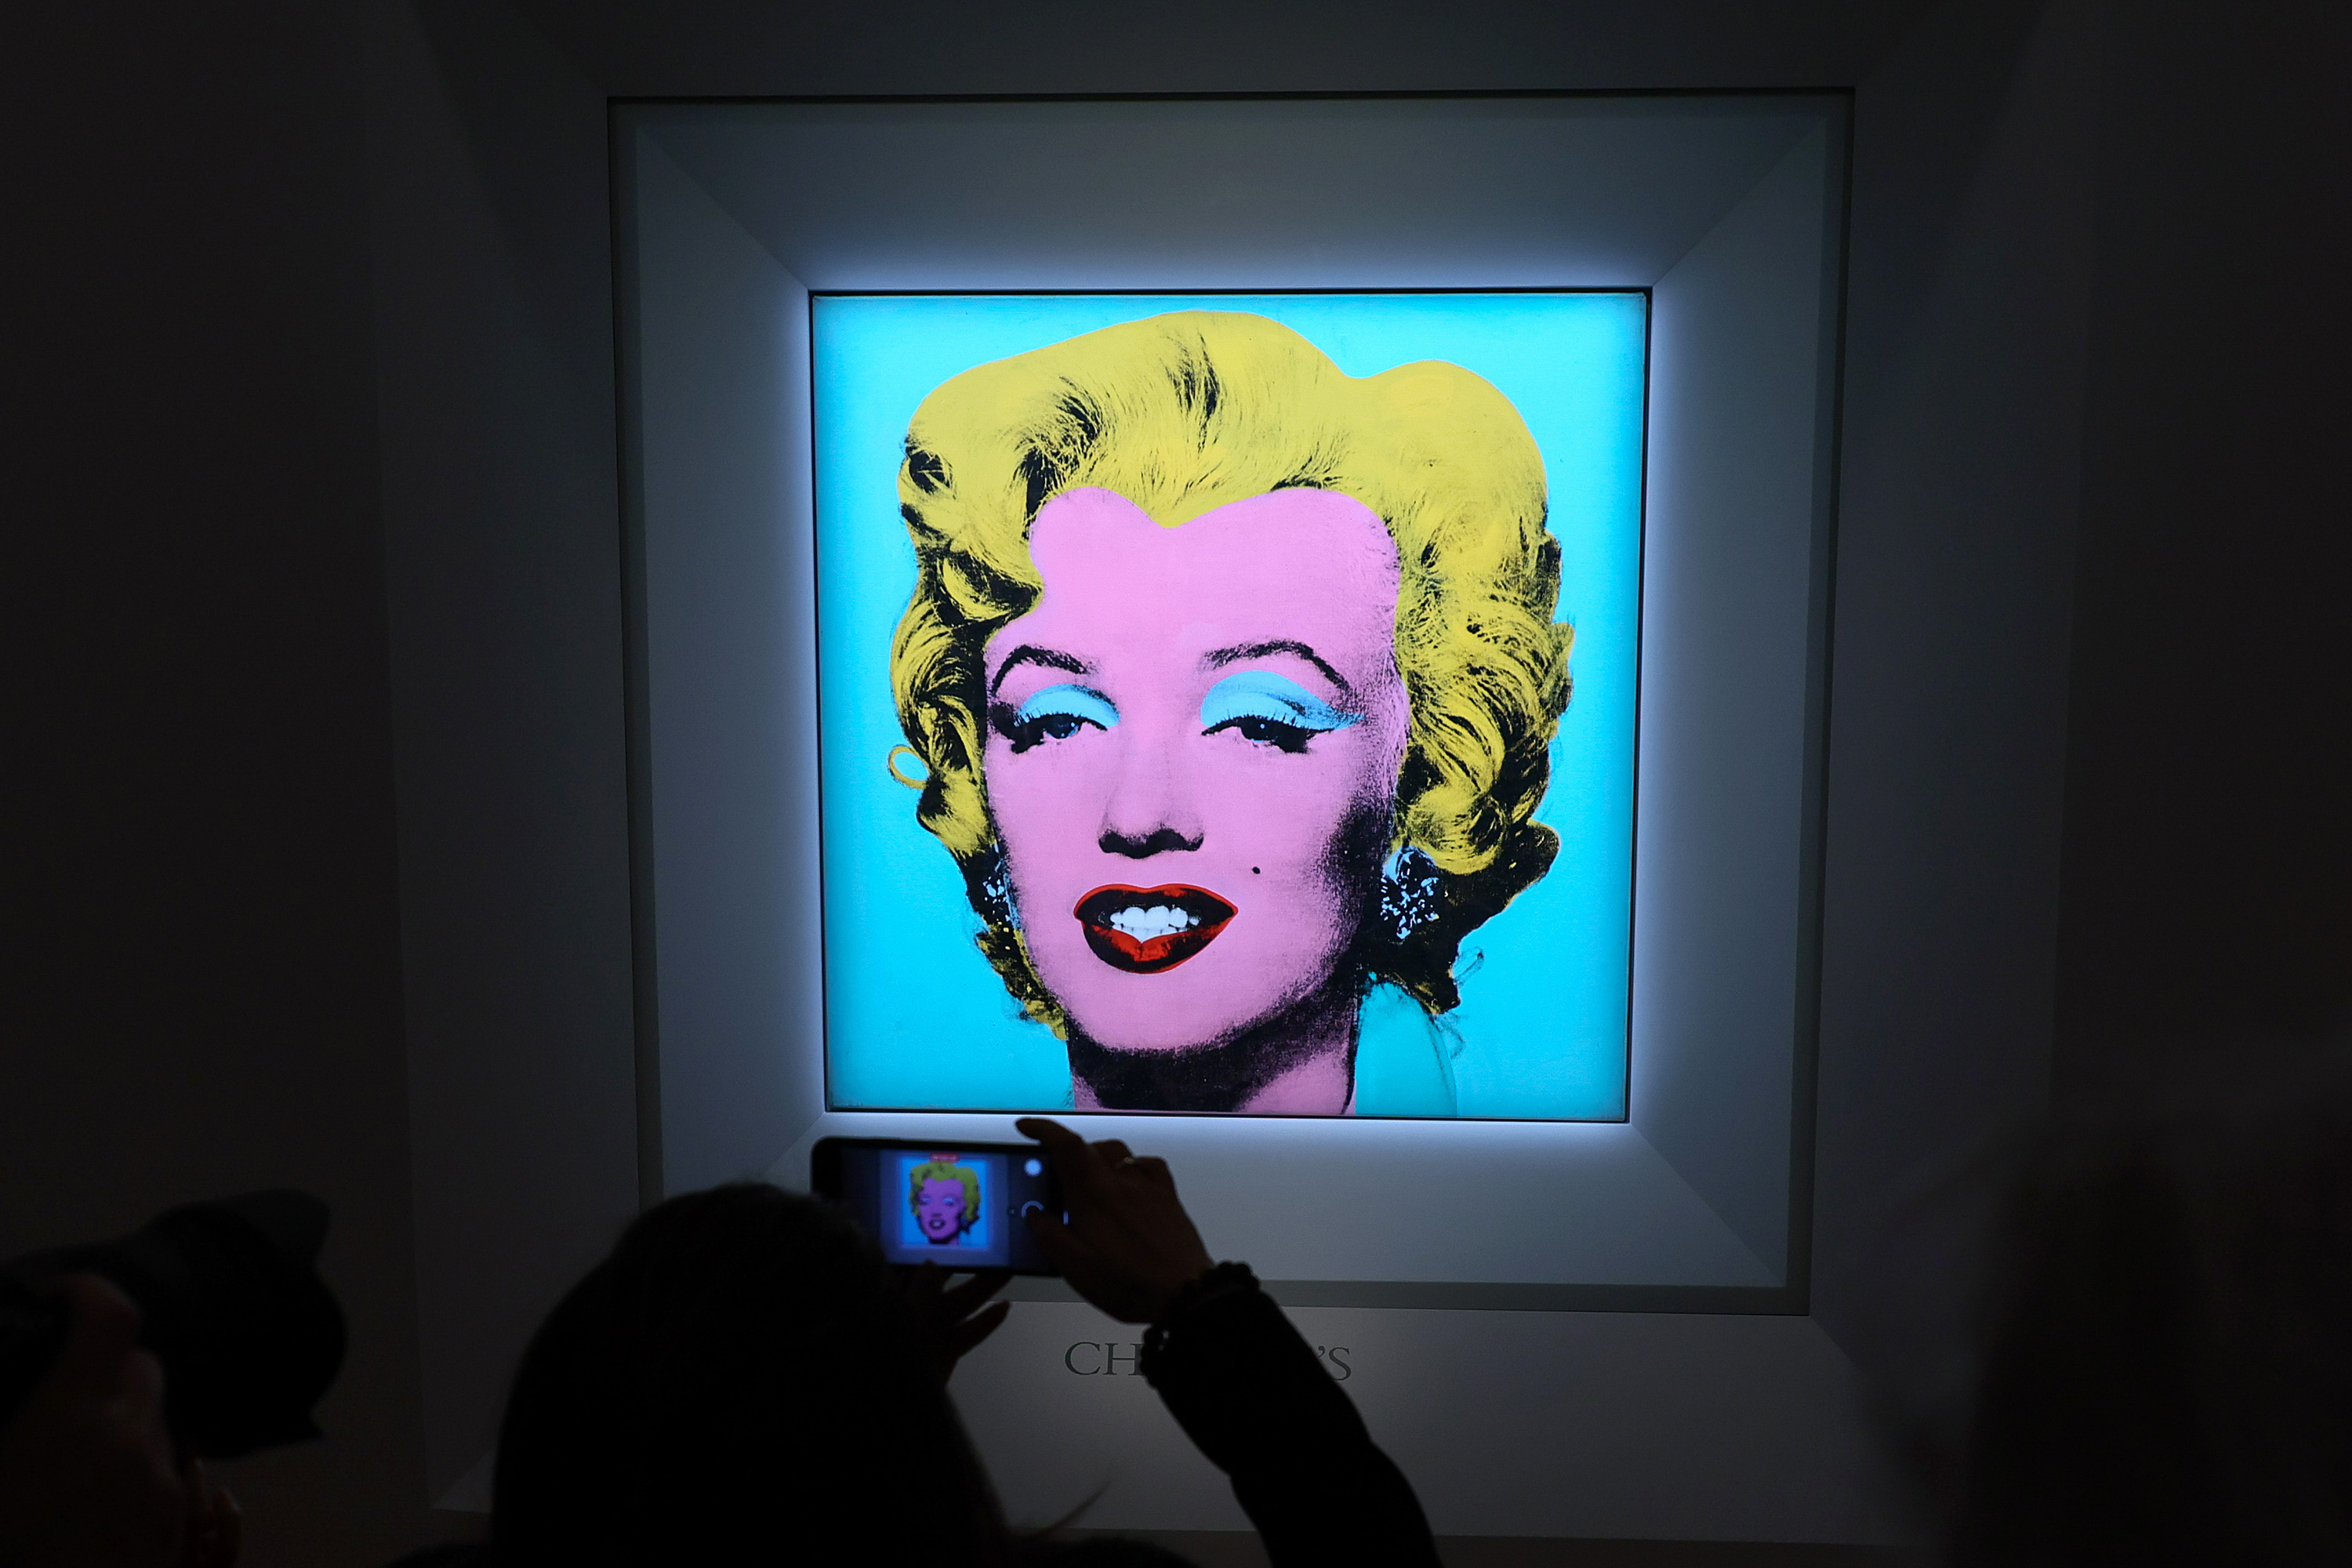 Since March it was reported that the piece would go up for auction Photo: Getty Images